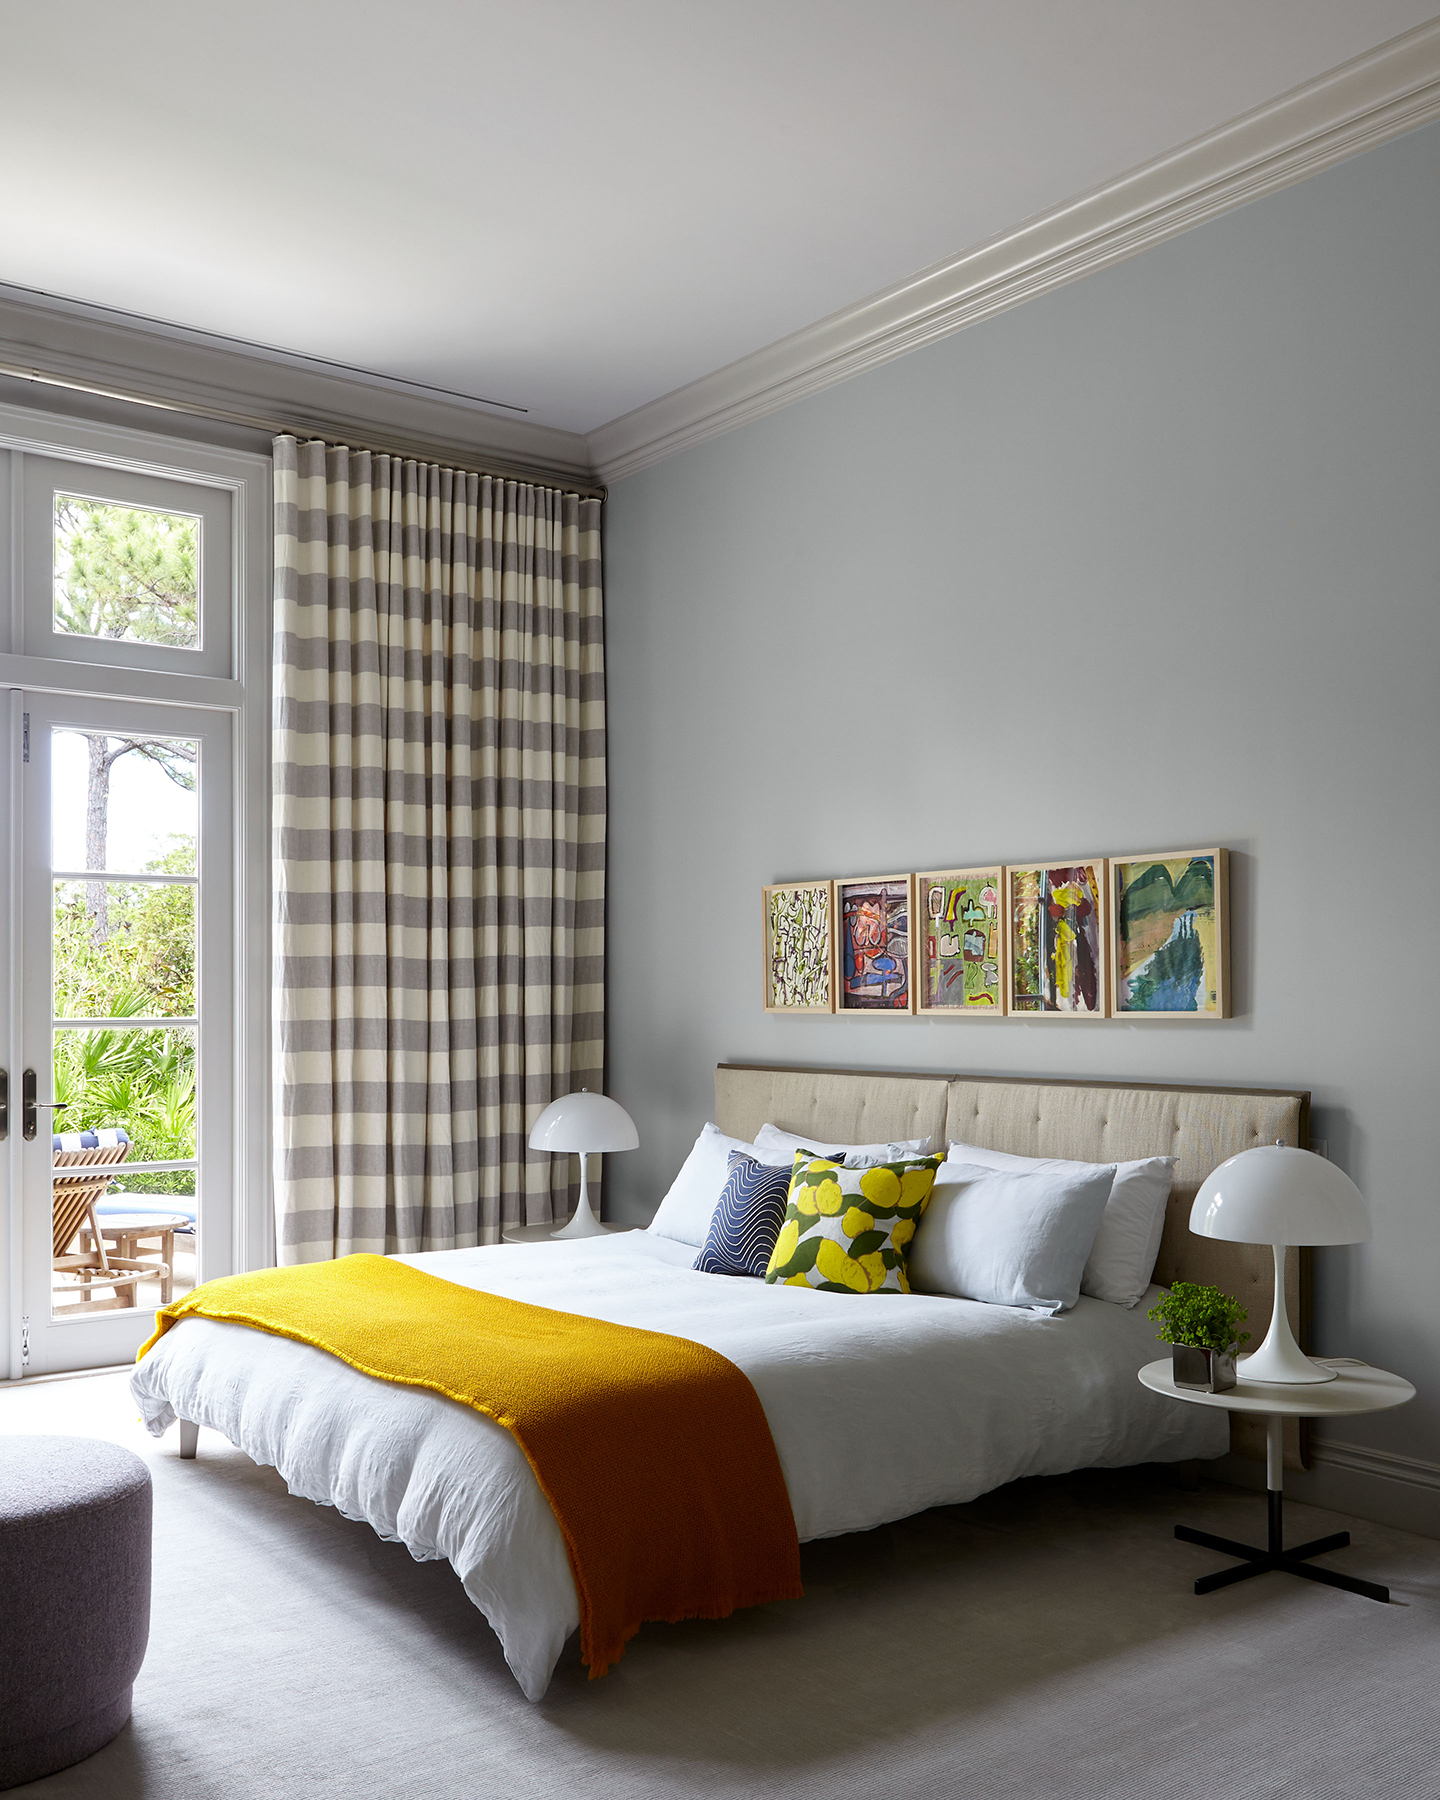 Illuminated Bedroom with Comfortable White Bed, Five Abstract Colorful Paintings, and Striped Curtains in Grey Shades